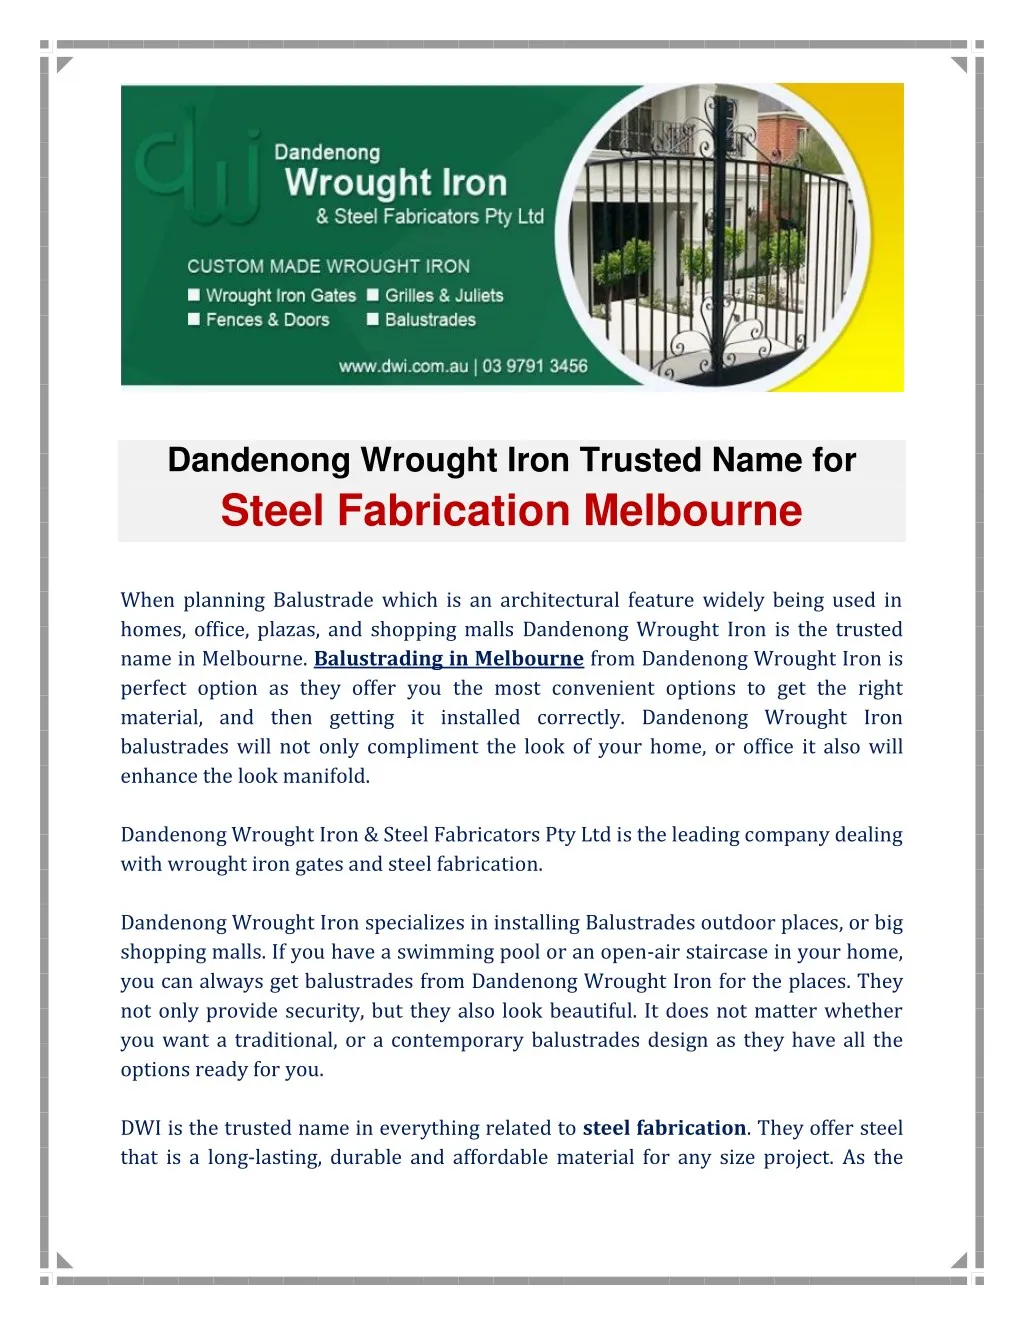 dandenong wrought iron trusted name for steel